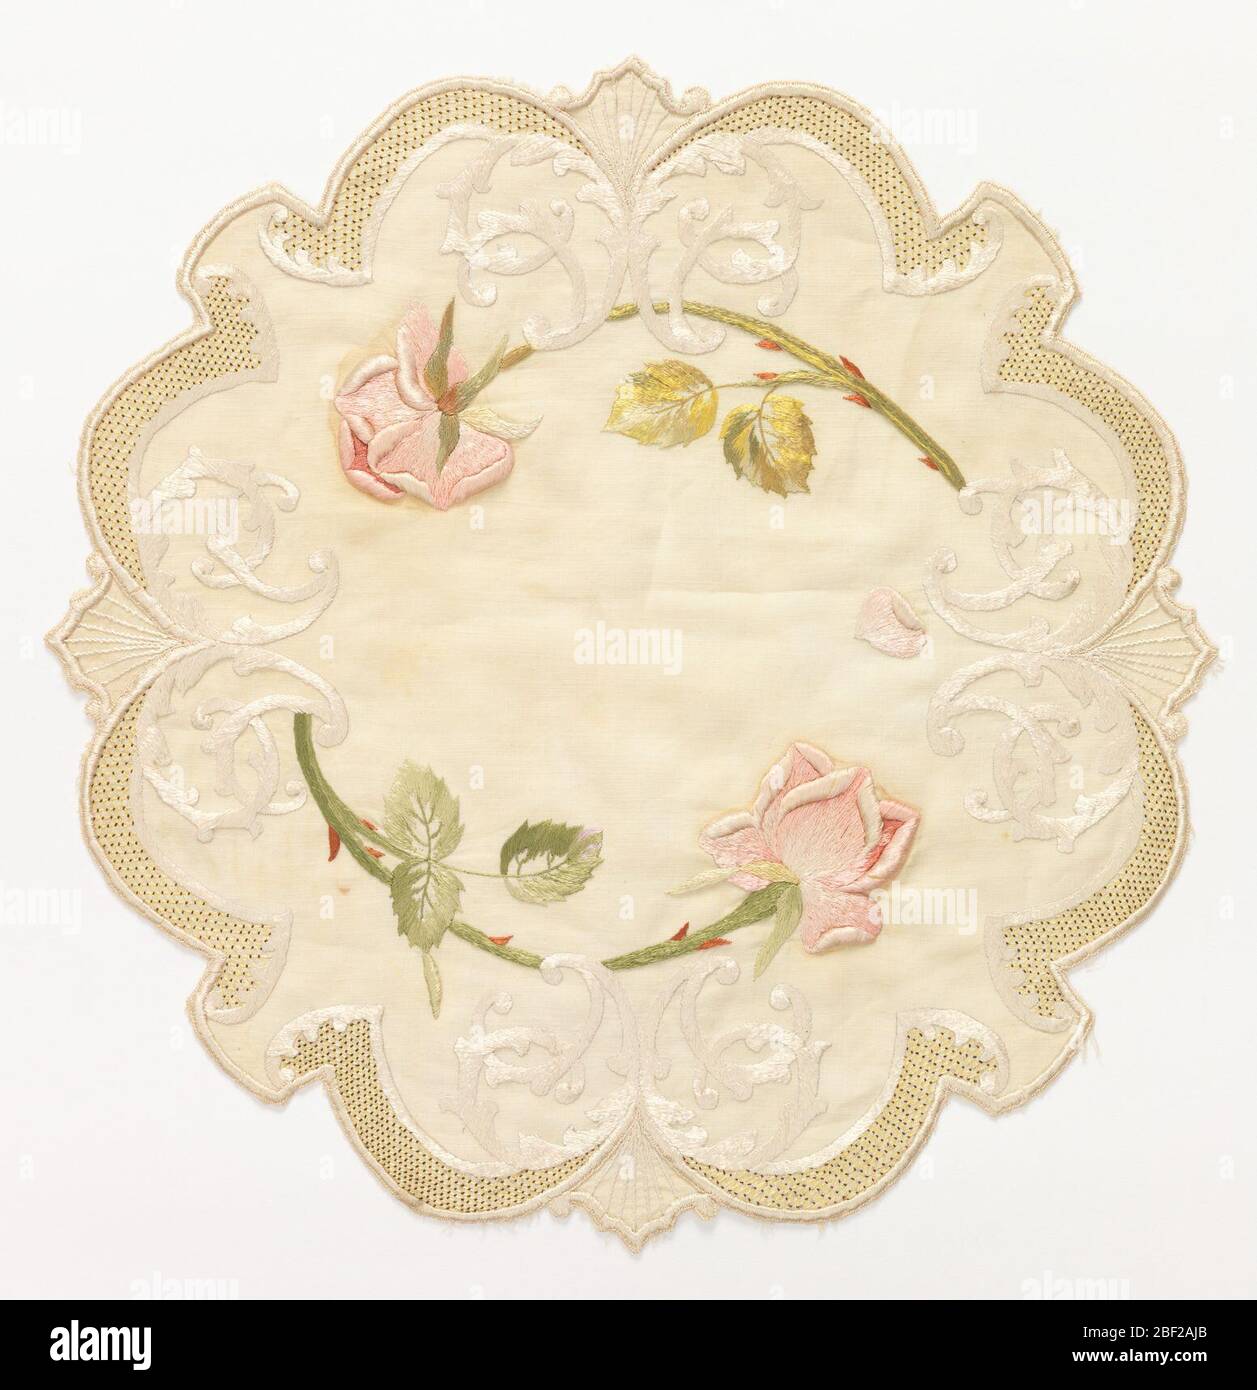 Table mat. Table mat of off-white linen, approximately round with scalloped edges. Embroidered in pale greens, pinks, red and off-white silks with a cipher entwined with two pink roses. Border of small yellow lattice with red dots. Stock Photo